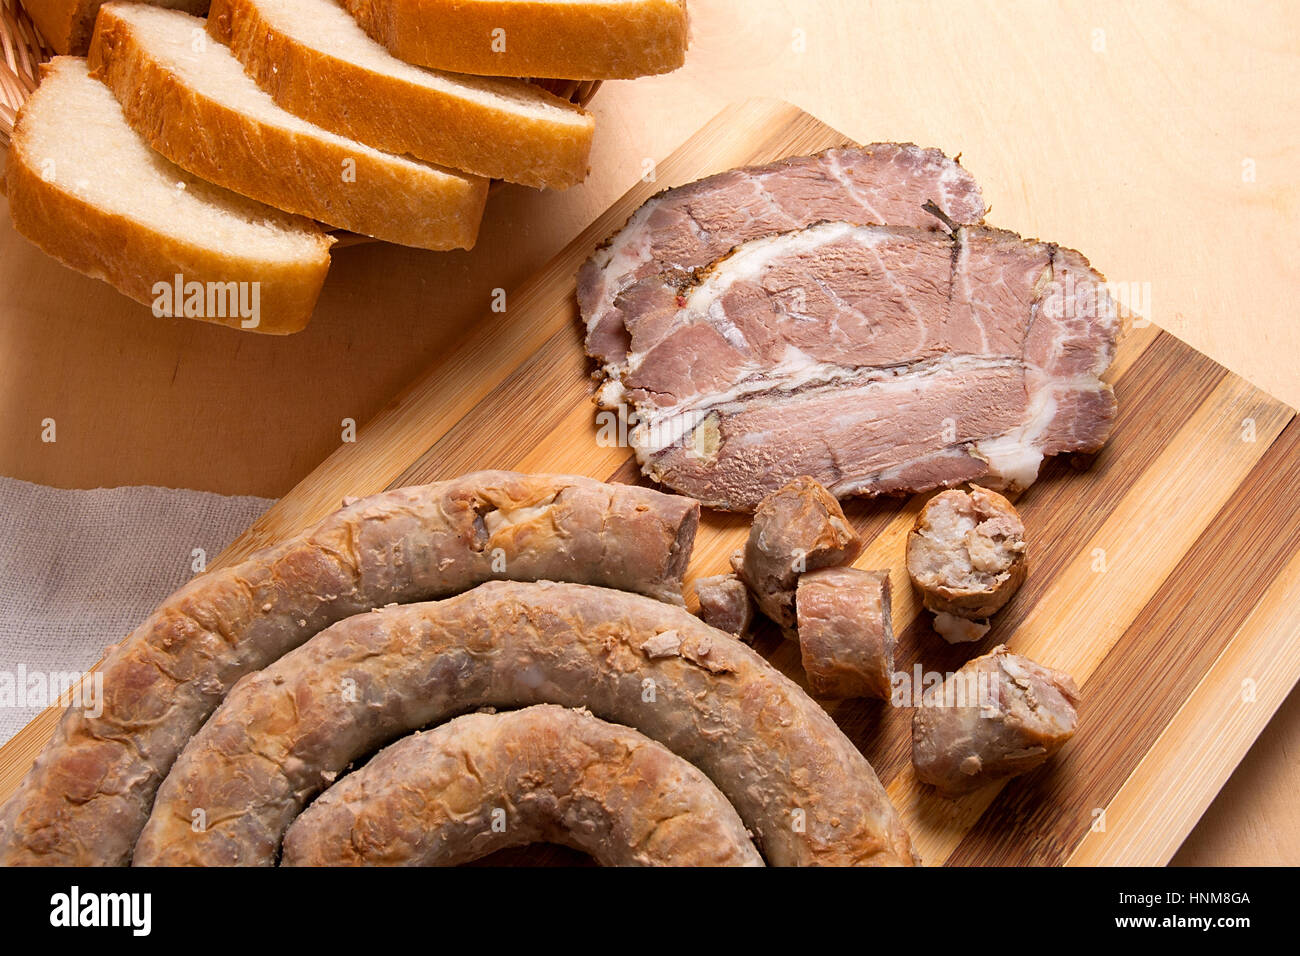 Roasted traditional homemade sausage with spices and herbs and slices spicy meat baked with herbs and spice on wooden cutting board. Slices white whea Stock Photo